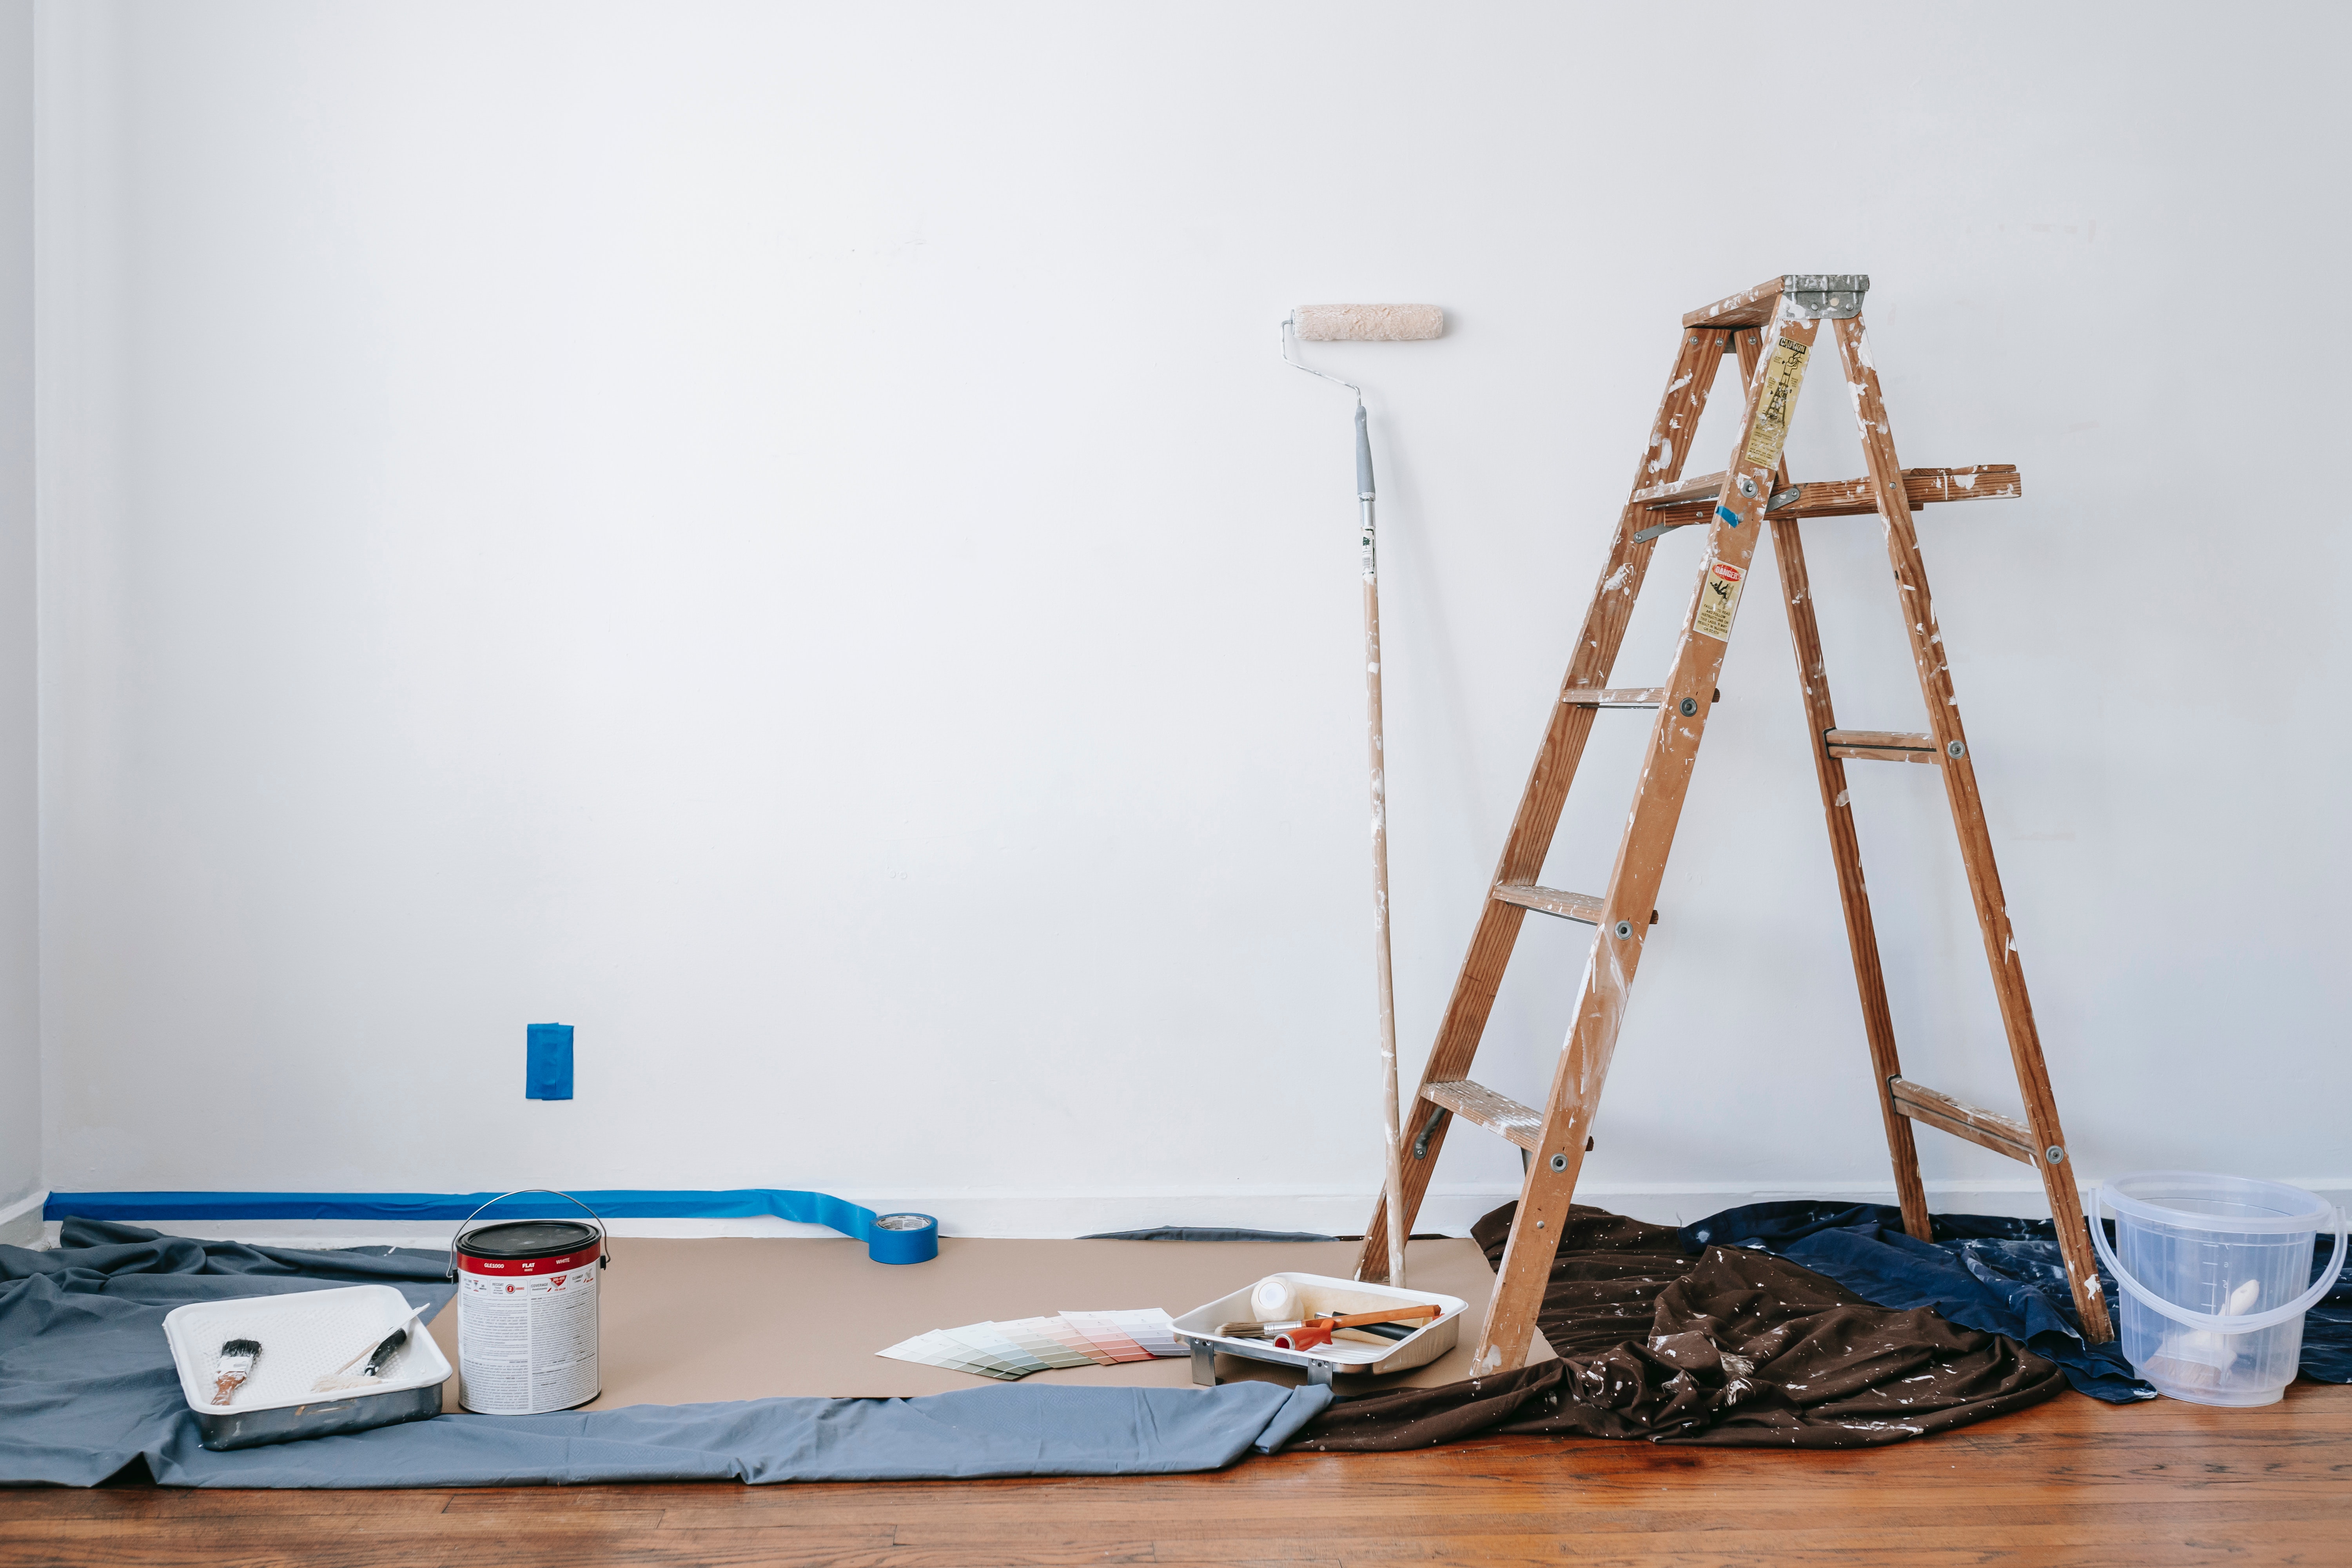 Stock photo of living room with wall-paint, ladder, paint supplies scattered.